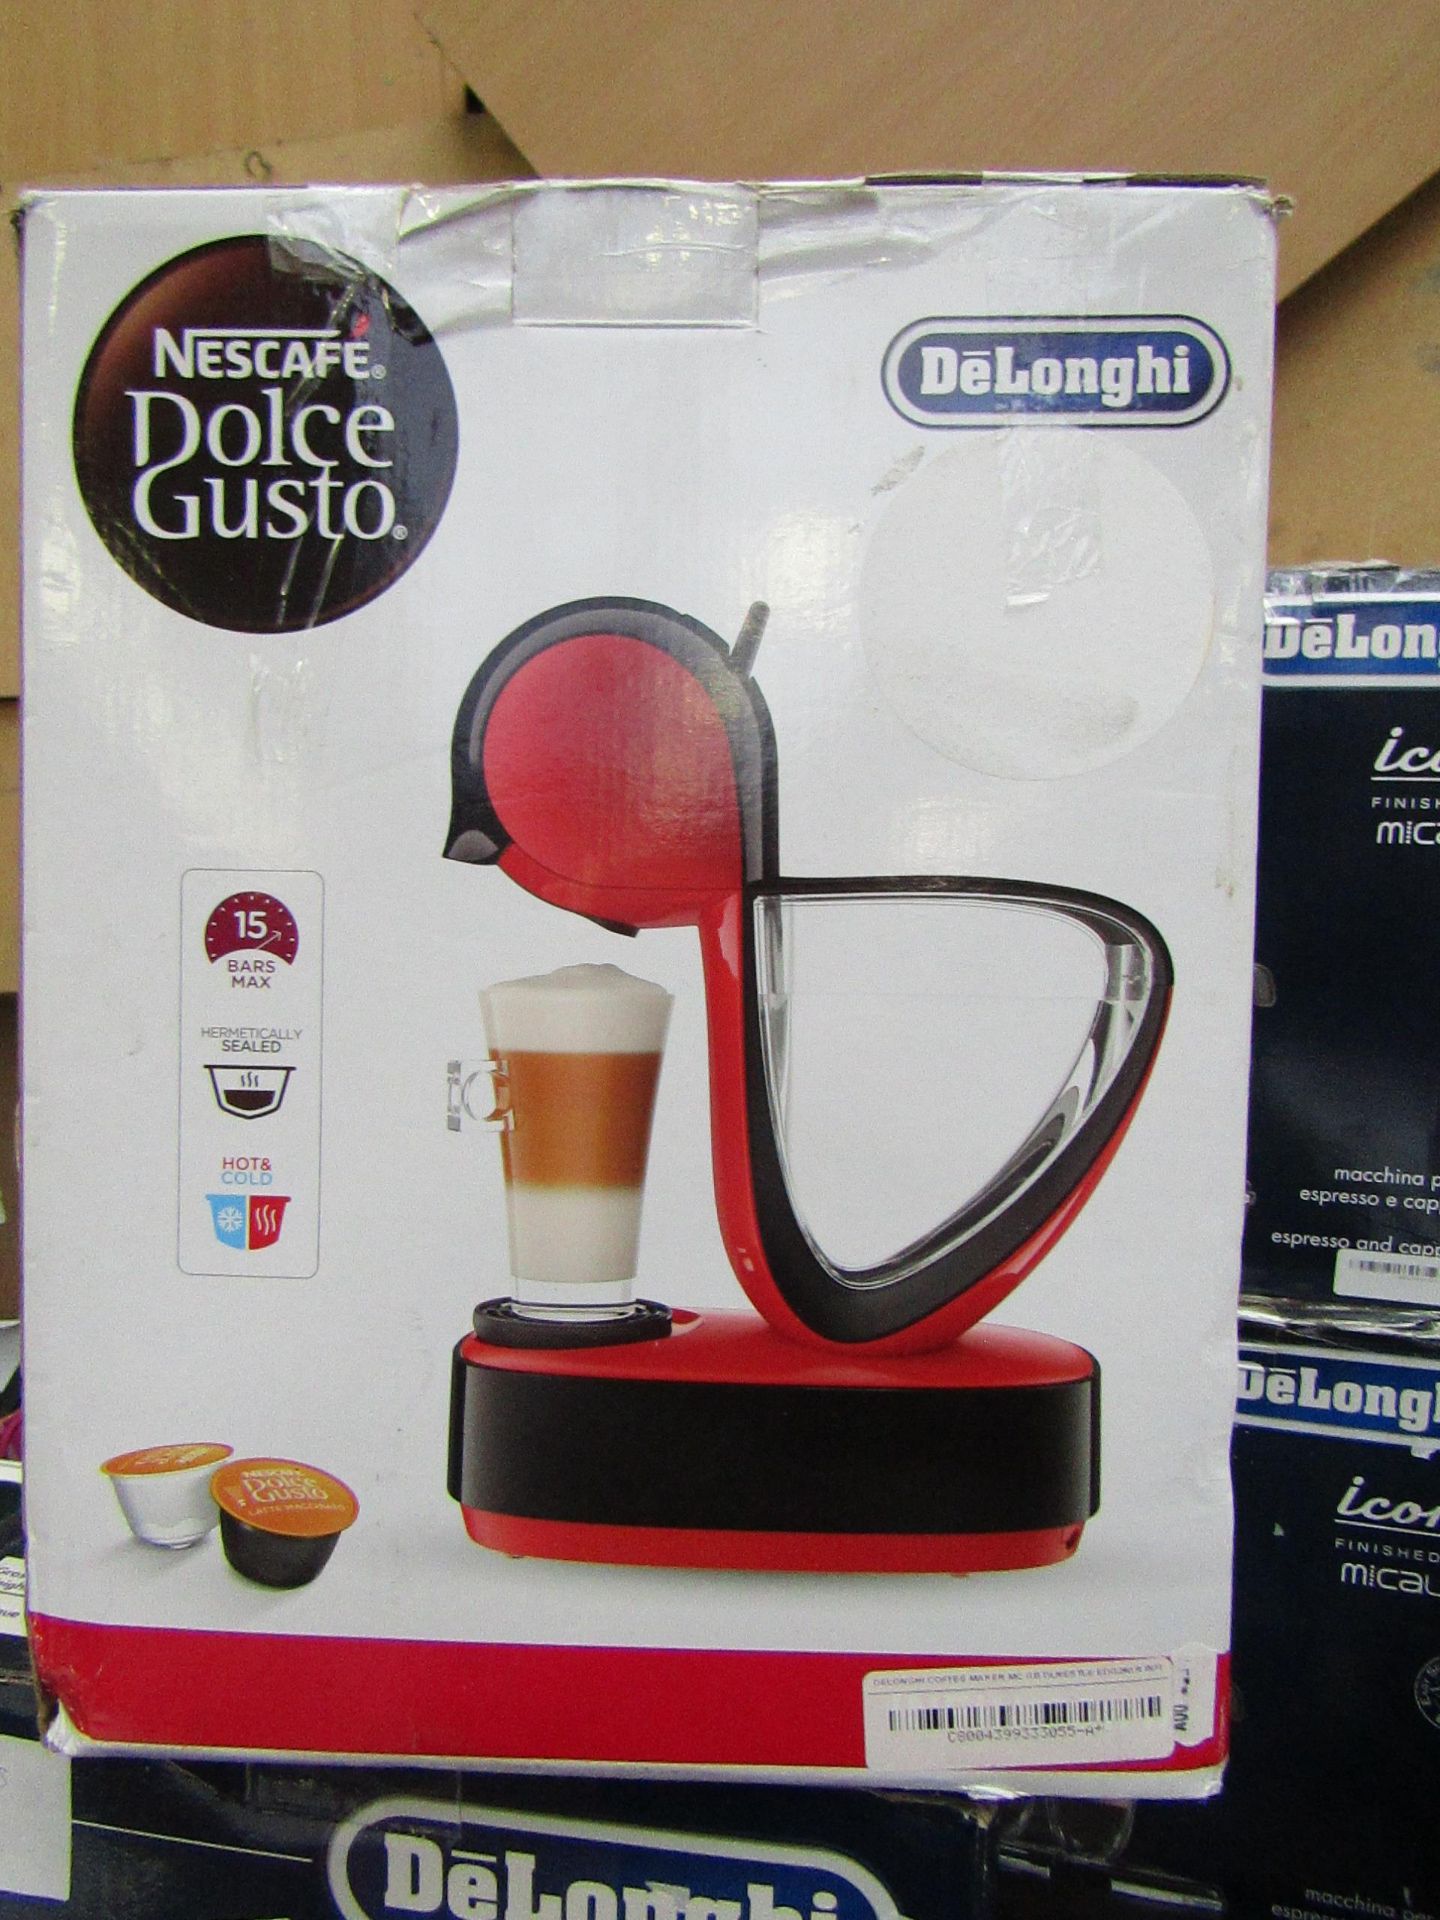 Delonghi - Dolce Gusto Infinissima Red Coffee Machine - Unchecked, Untested & Boxed. RRP £95.99